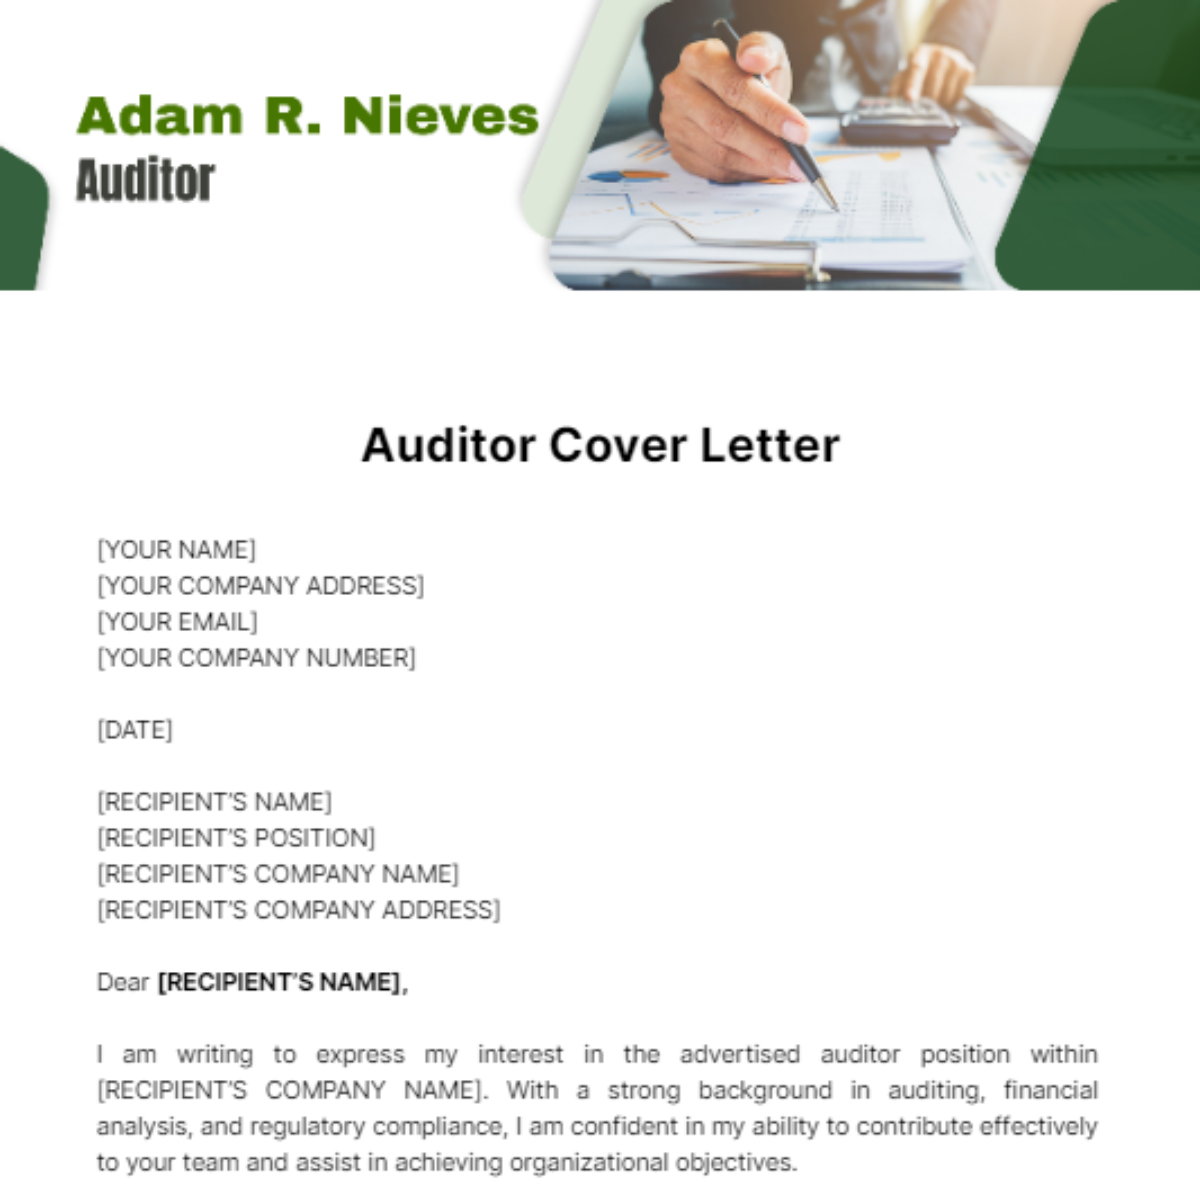 Auditor Cover Letter Template